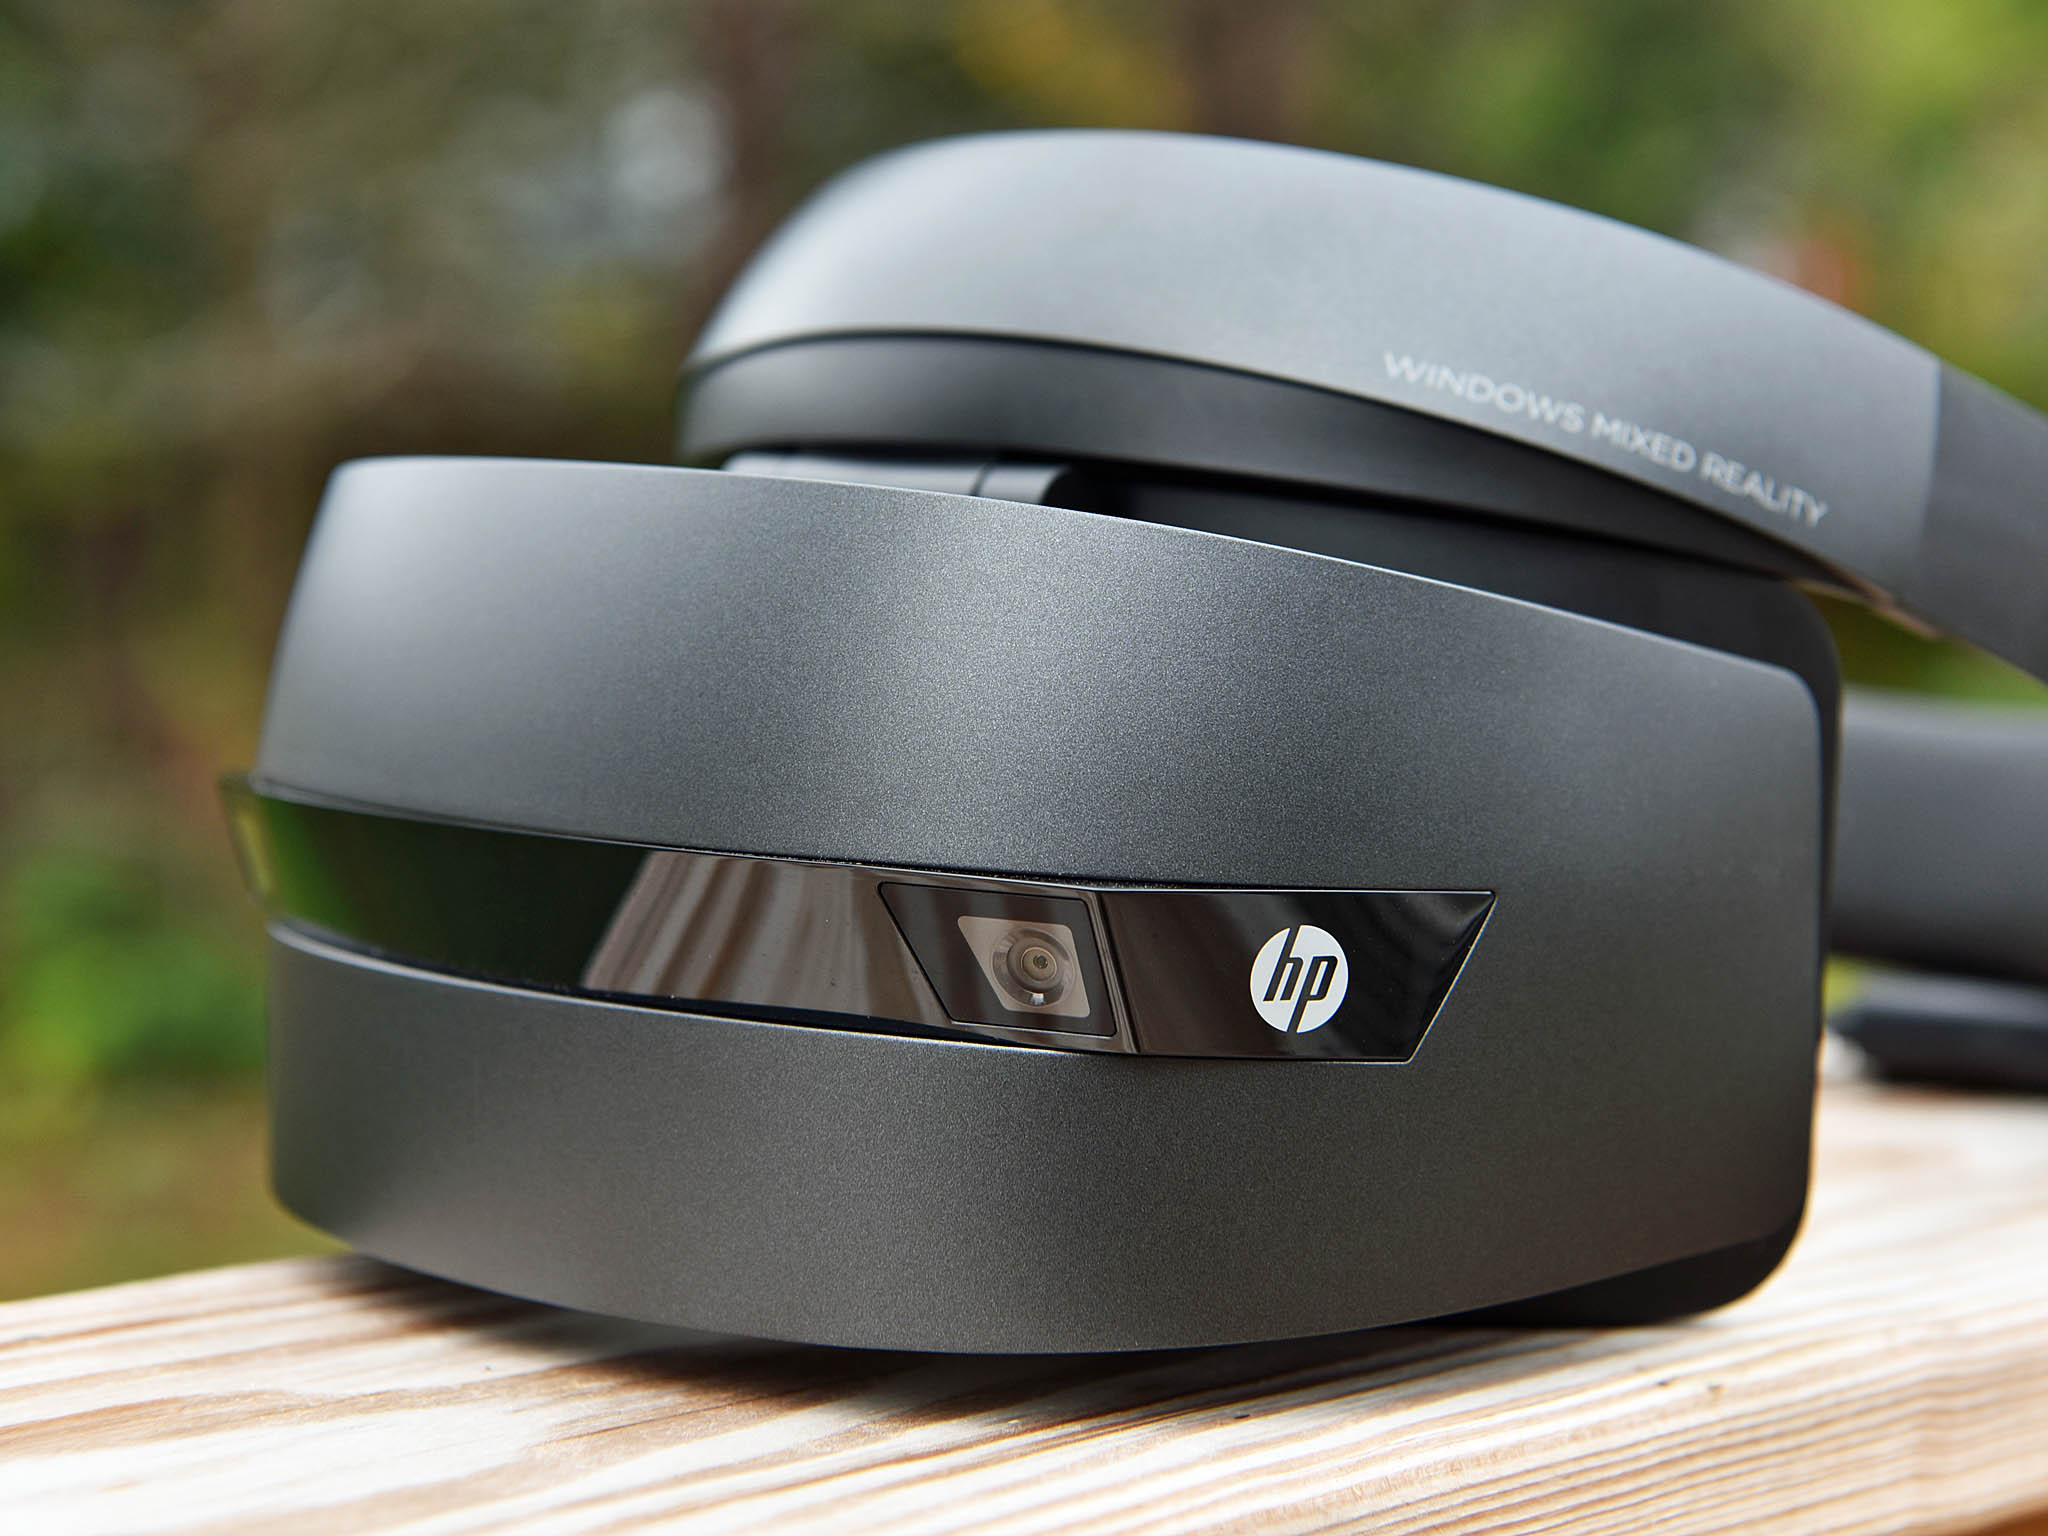 At dræbe Råd hjemmelevering HP Windows Mixed Reality Headset review: I'm a believer | Windows Central